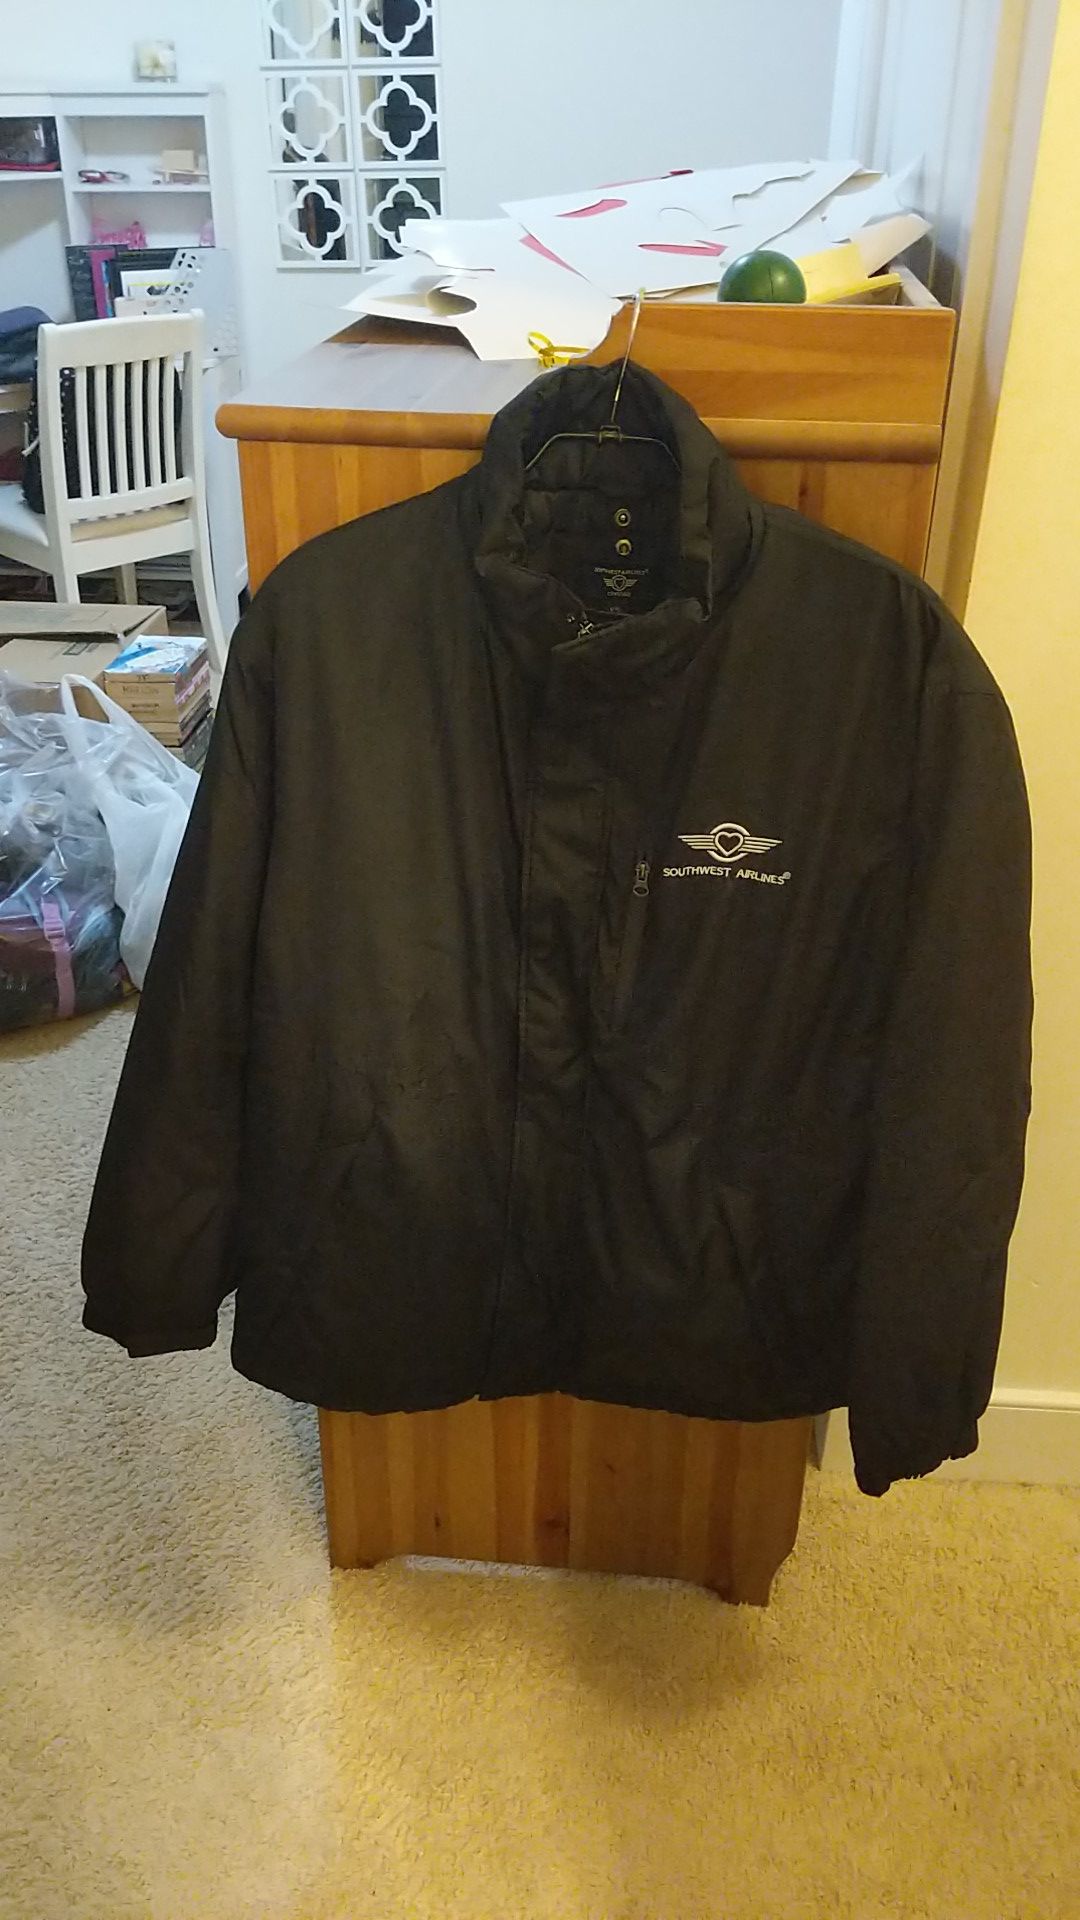 Southwest Airlines Heavy filled jacket with hood - PRICE DROP!